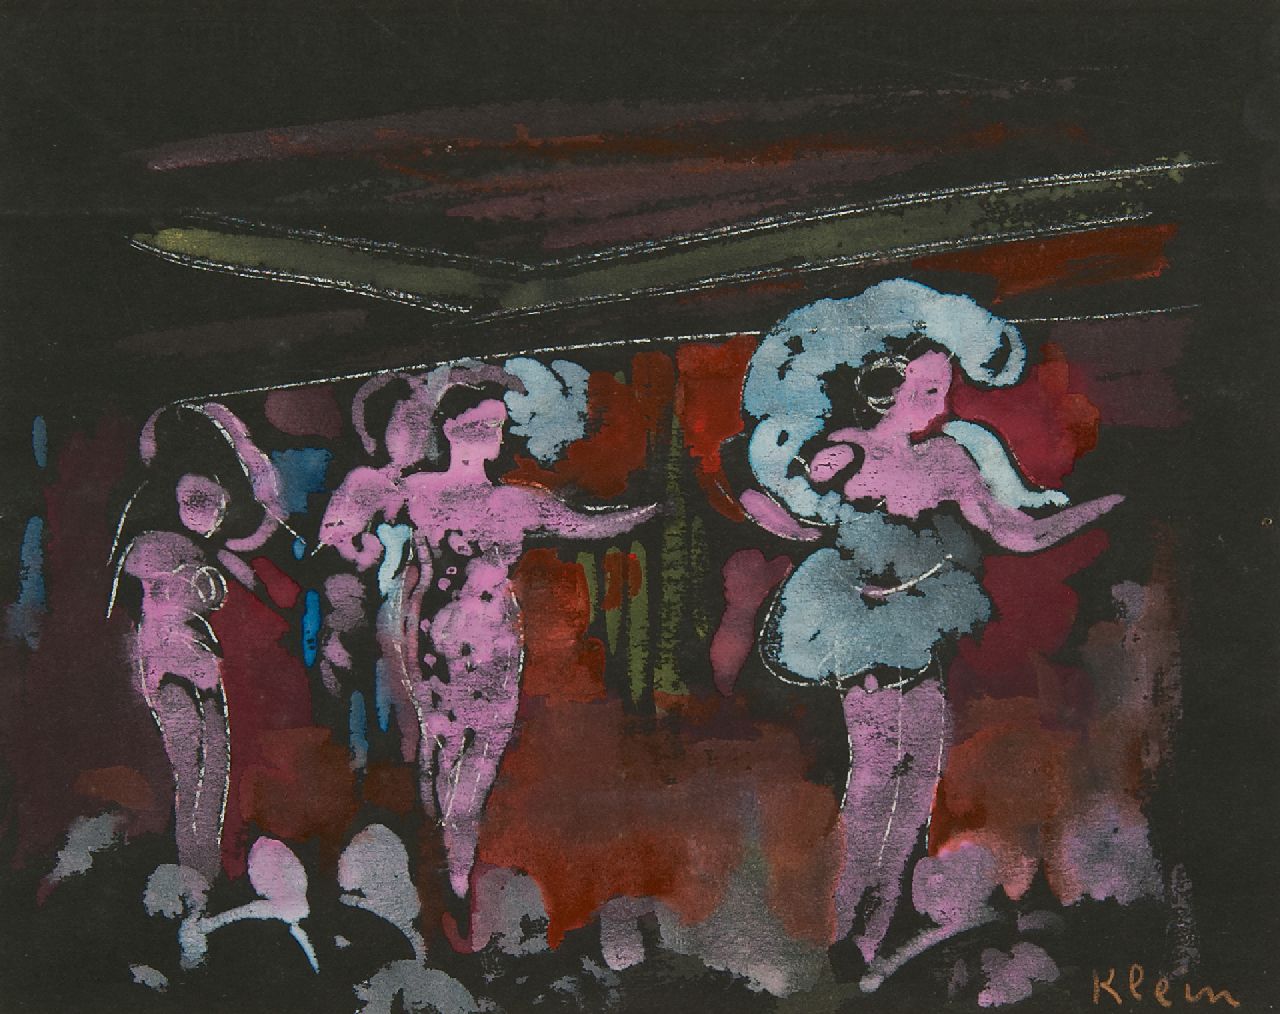 Klein F.F.A.  | Friedrich Franz Albert 'Frits' Klein | Watercolours and drawings offered for sale | Show dancers, gouache on paper 25.2 x 32.4 cm, signed l.r.